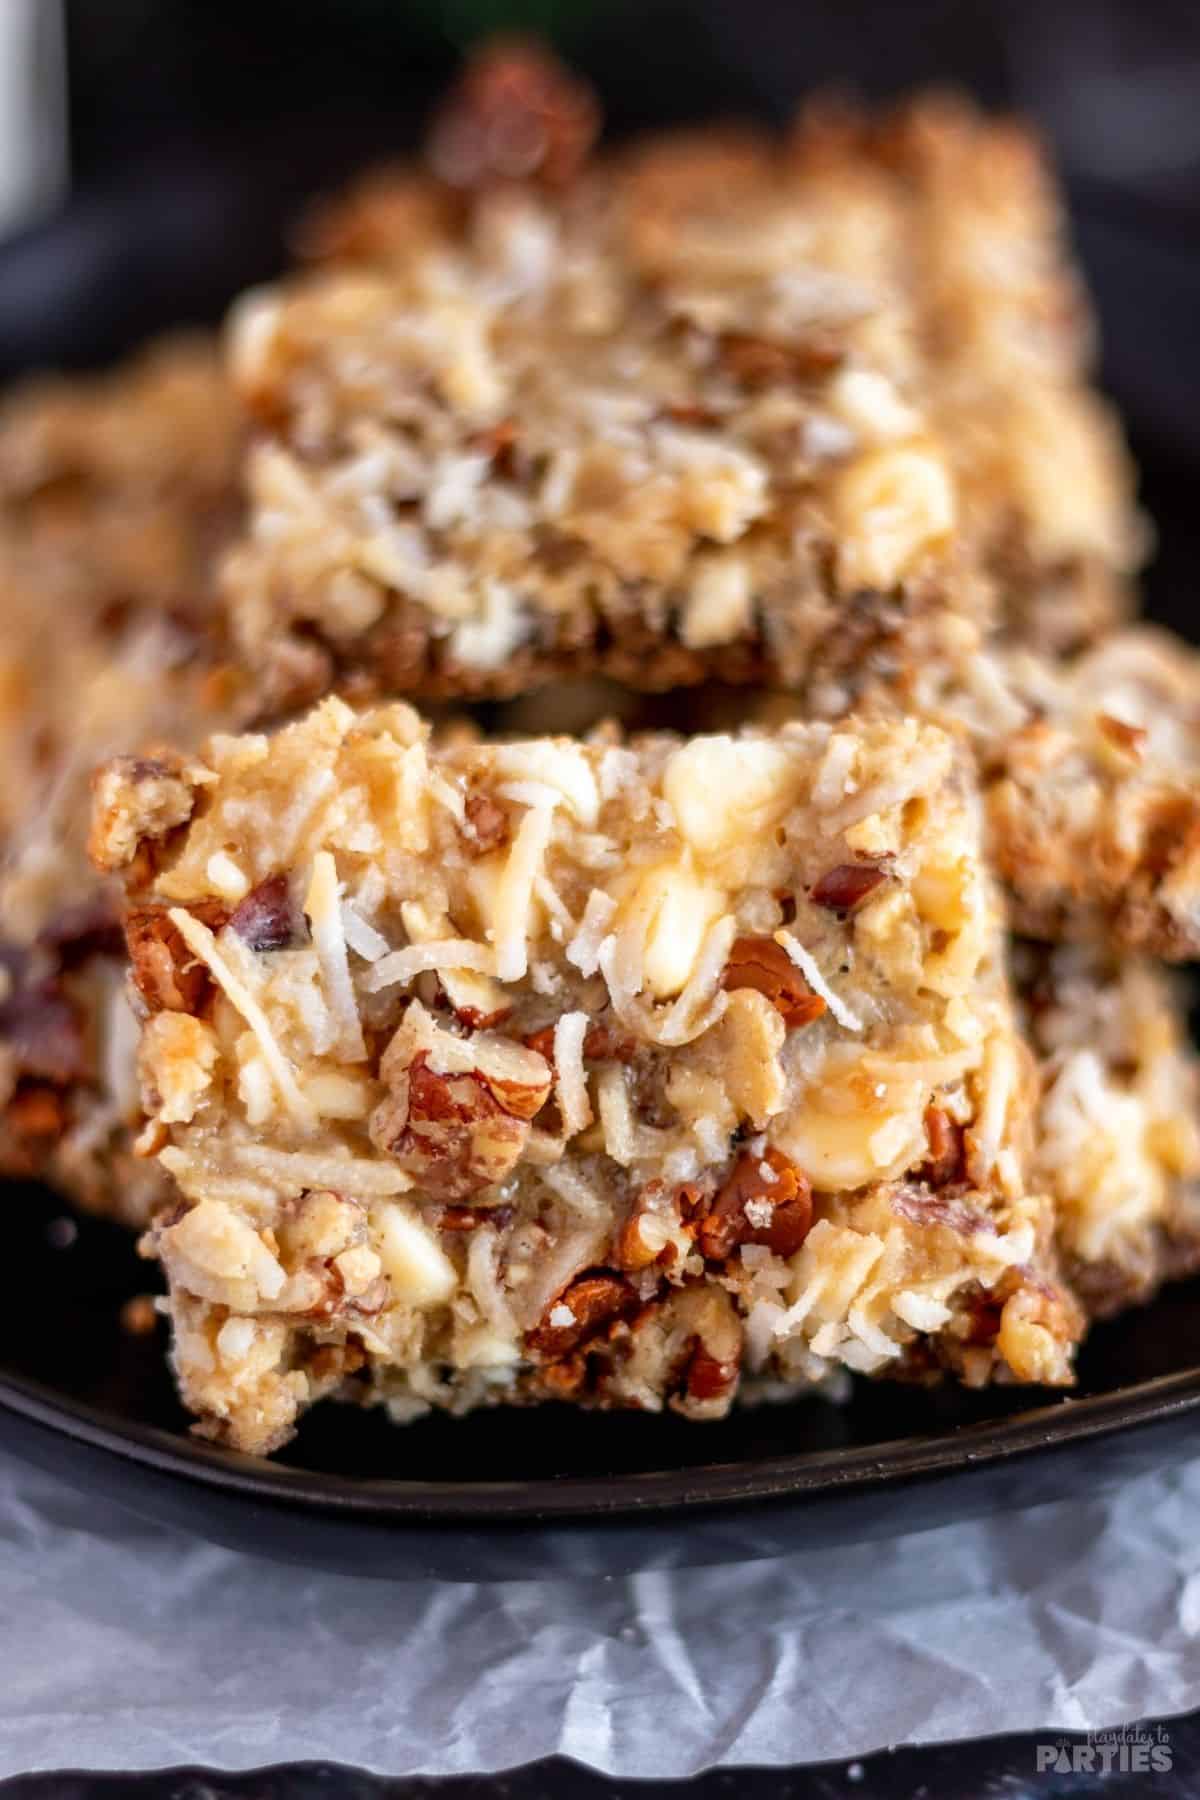 A close in view of dessert bars with pecans, cinnamon chips, coconut flakes, and ginger.